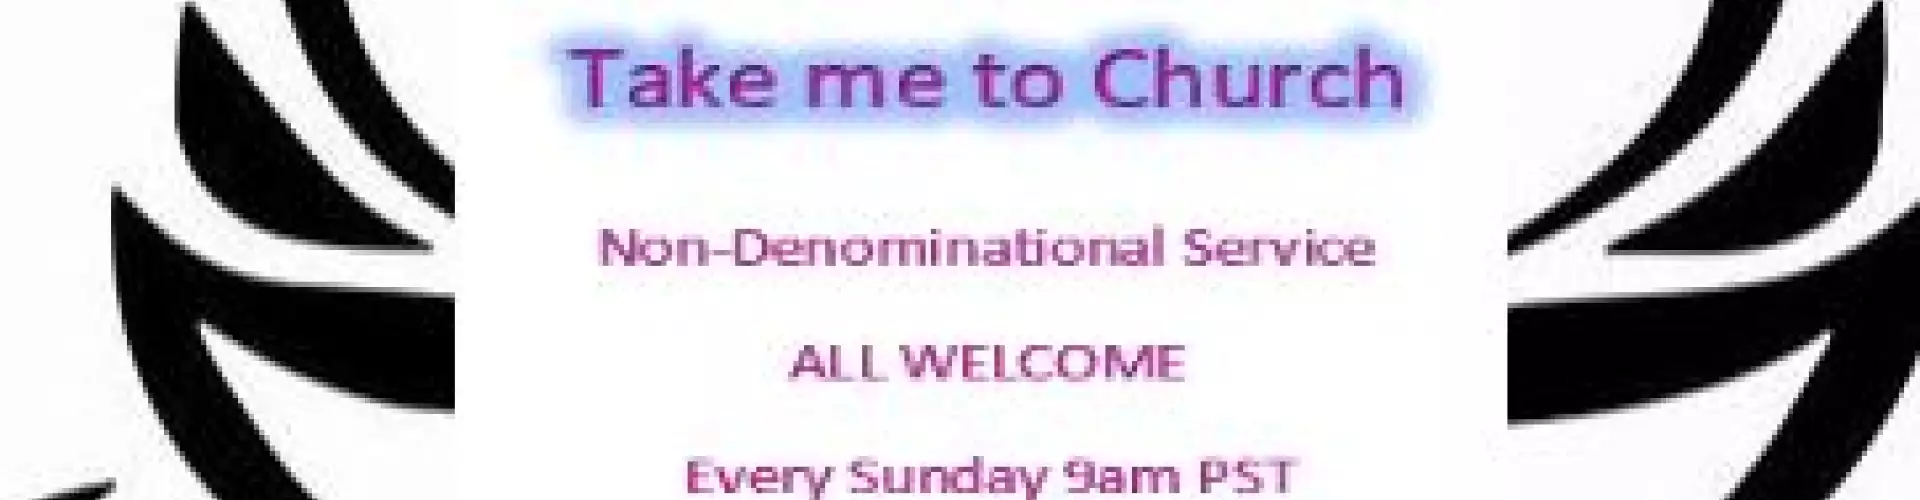 Into Enlightenment- Sunday Non-Denominational Service - ALL WELCOME